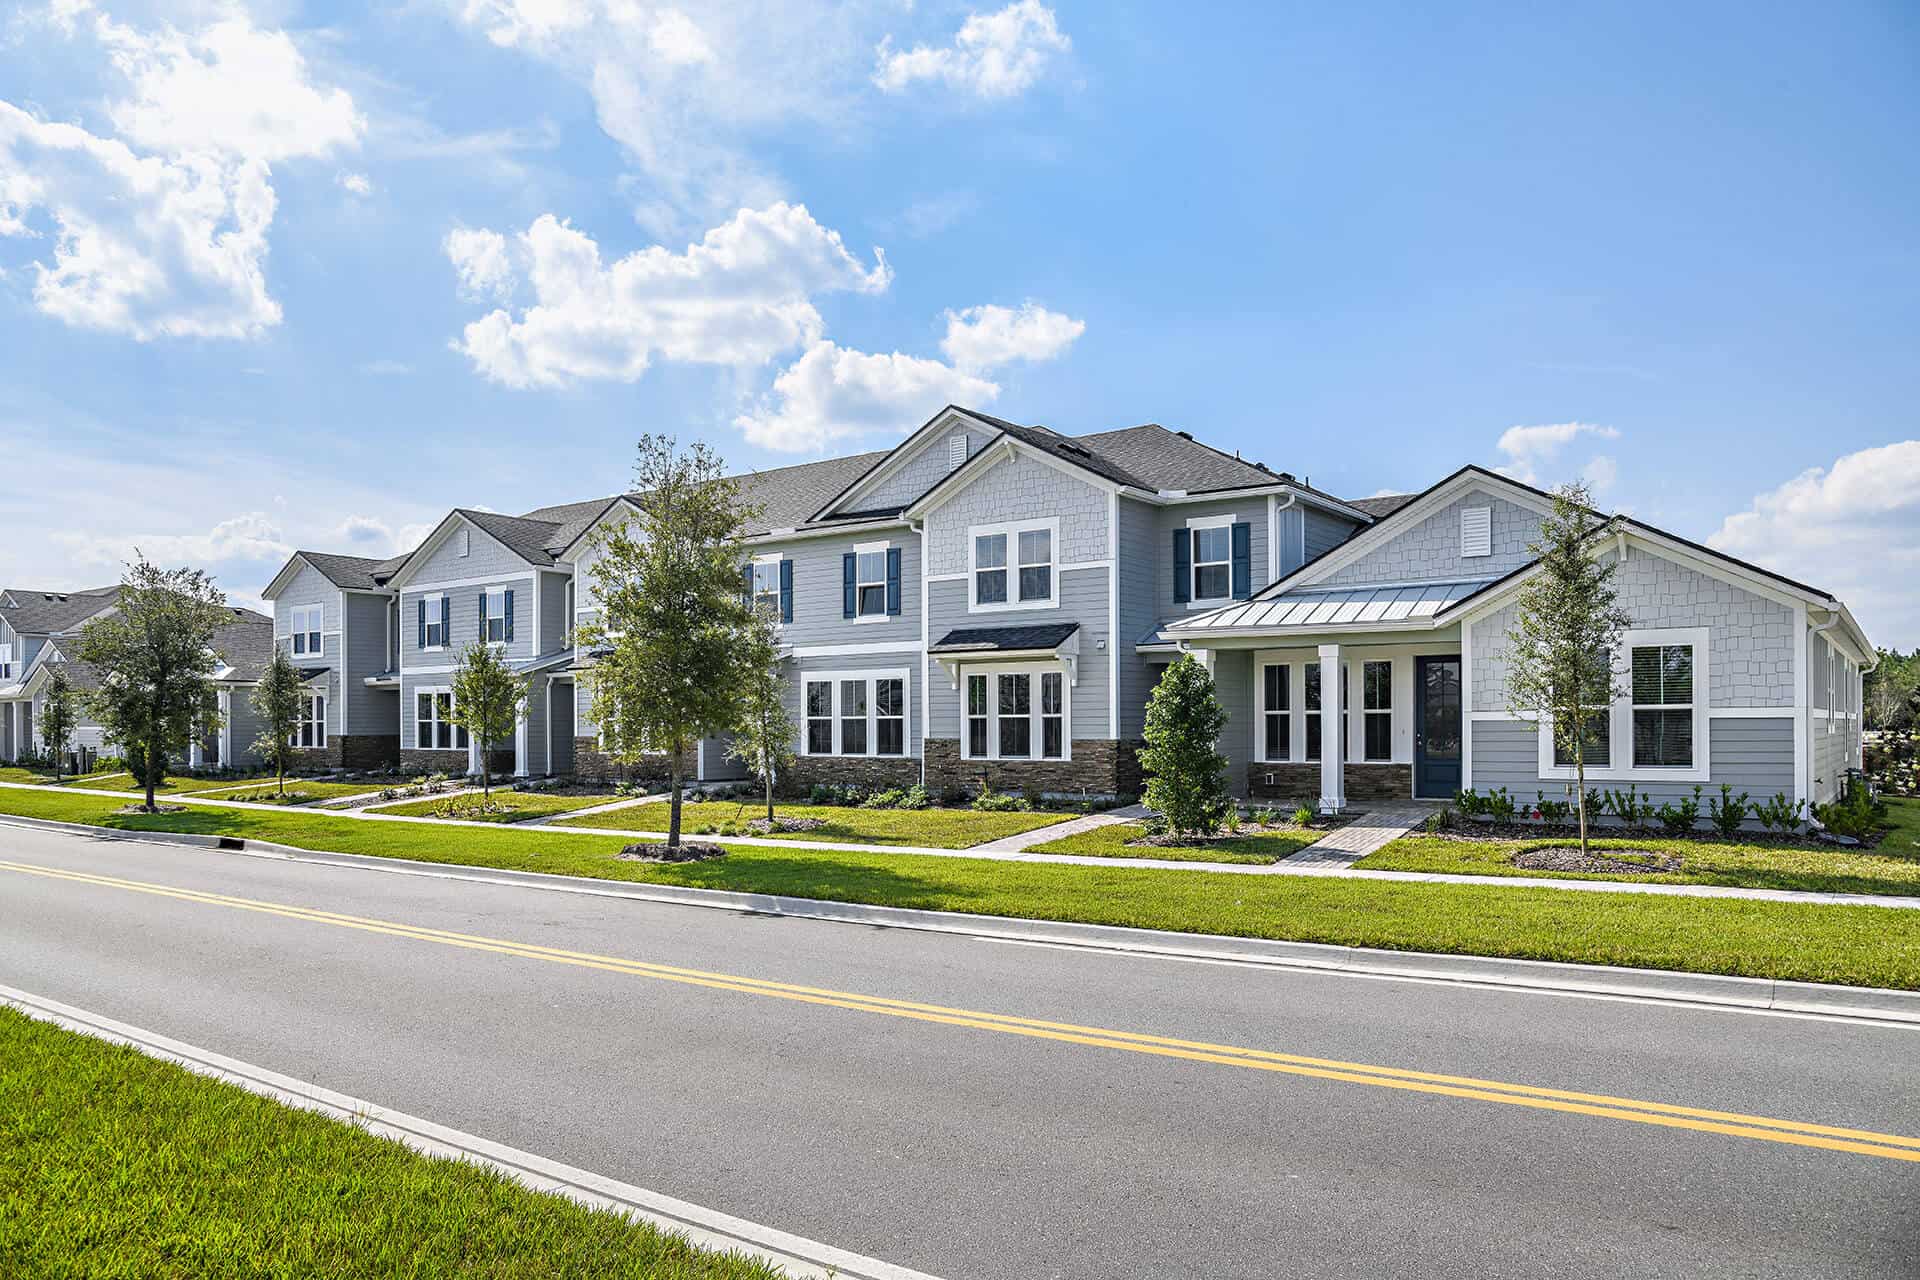 360 Communities Delivers High-Quality New Homes for Lease to Meet Growing Demand